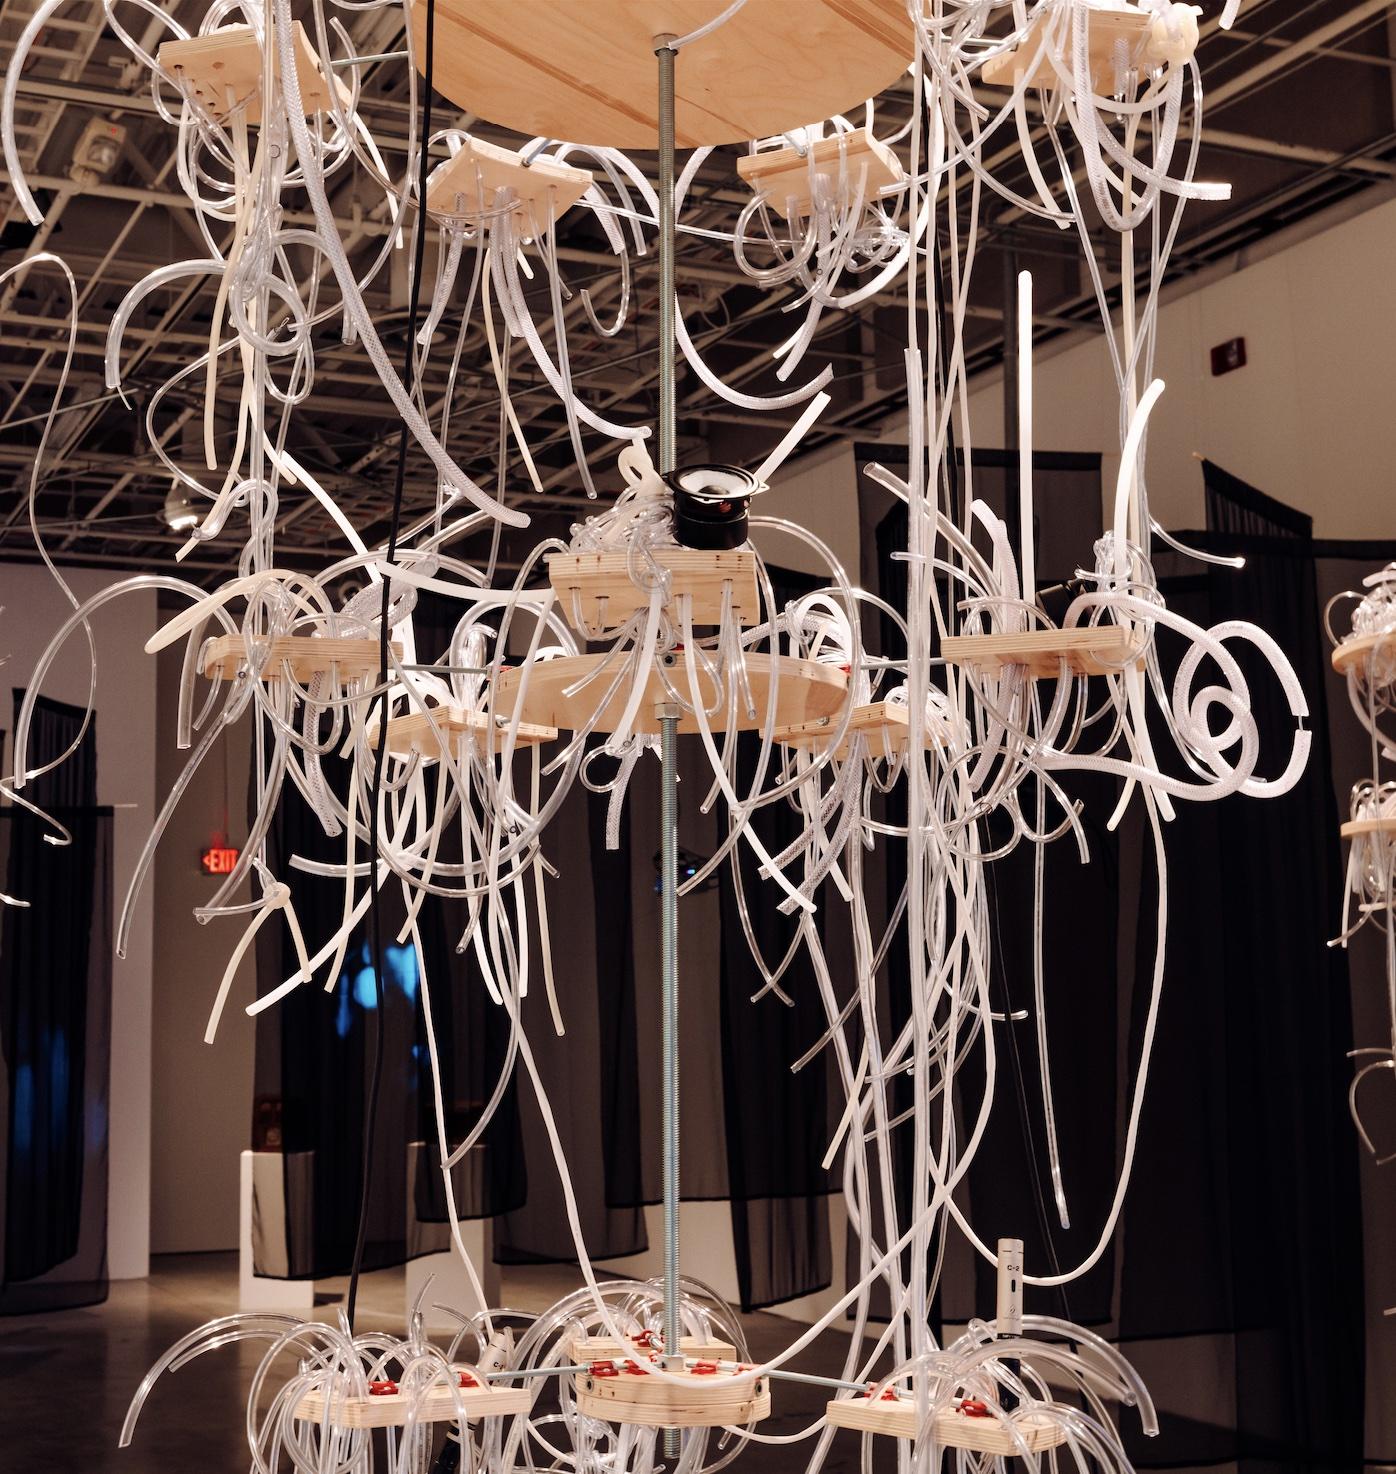 Close-up of babbel’s central chandelier, a multi-tiered suspended wooden sculpture with plastic tubes spilling outwards over the sides. There are four speakers, two microphones, and red 3D printed parts integrated into the sculpture.